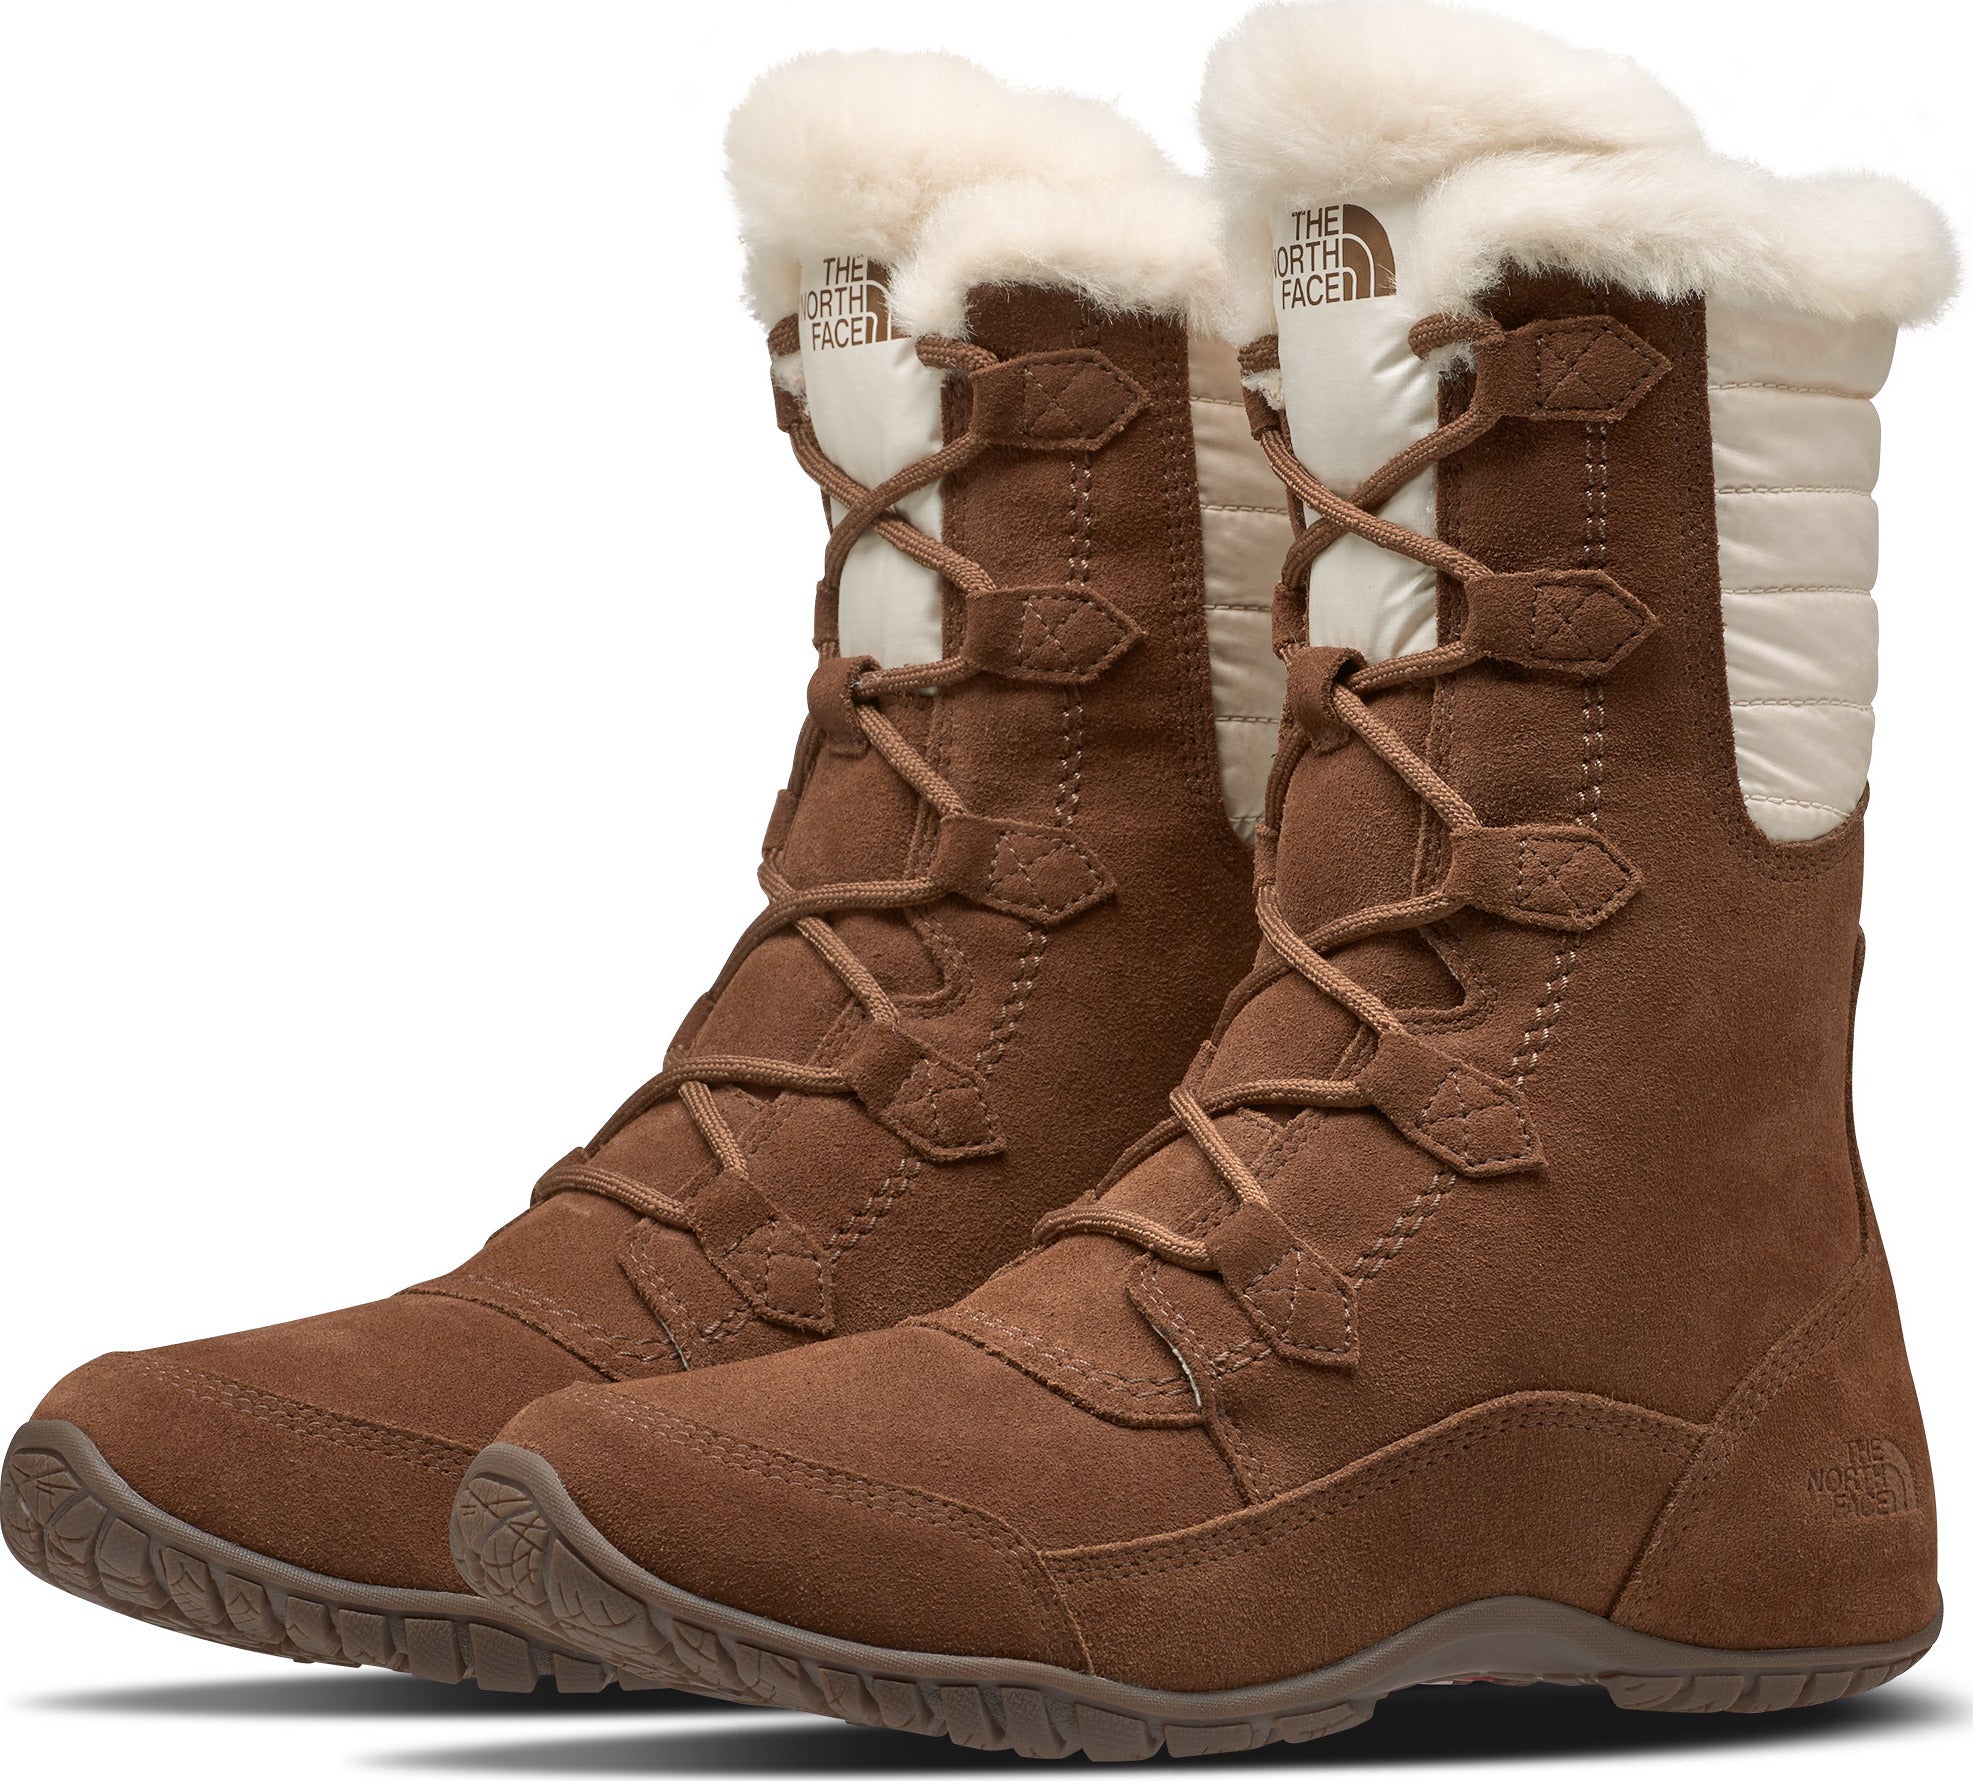 the north face women's purna luxe winter boots